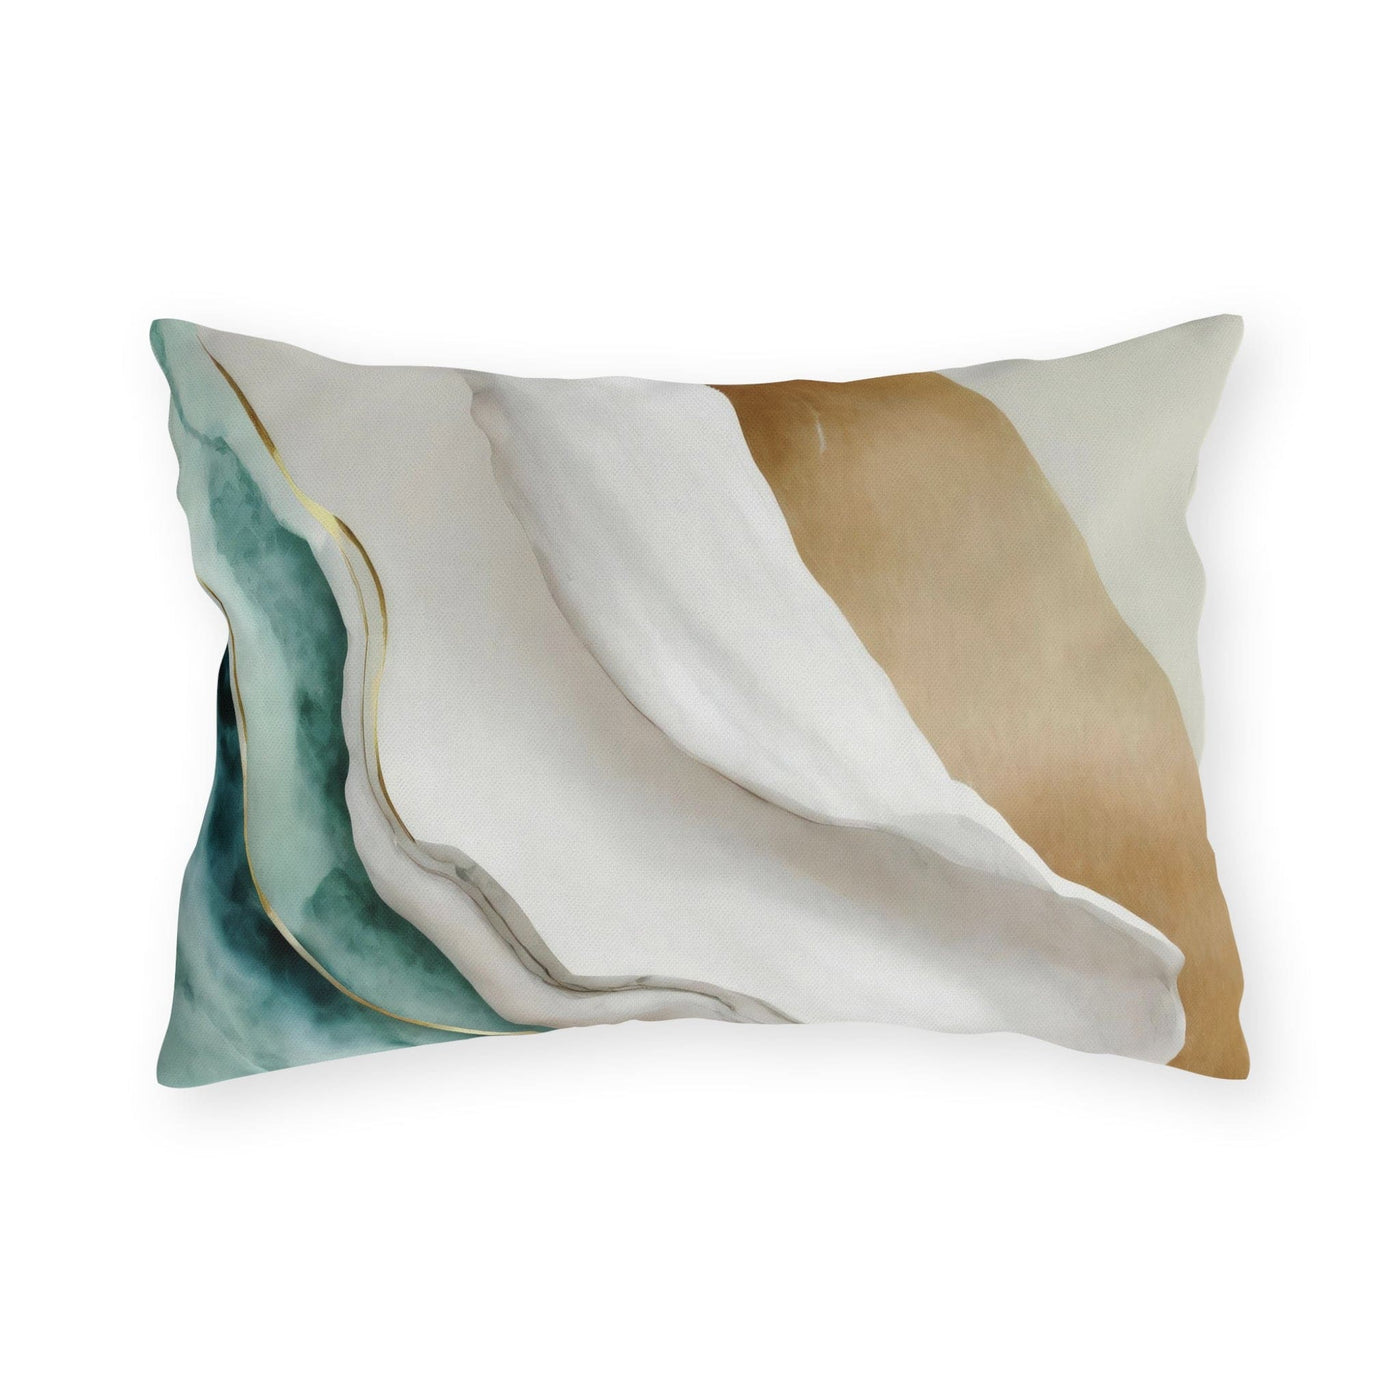 Indoor/outdoor Throw Pillow Cream White Green Marbled Print - Home Decor